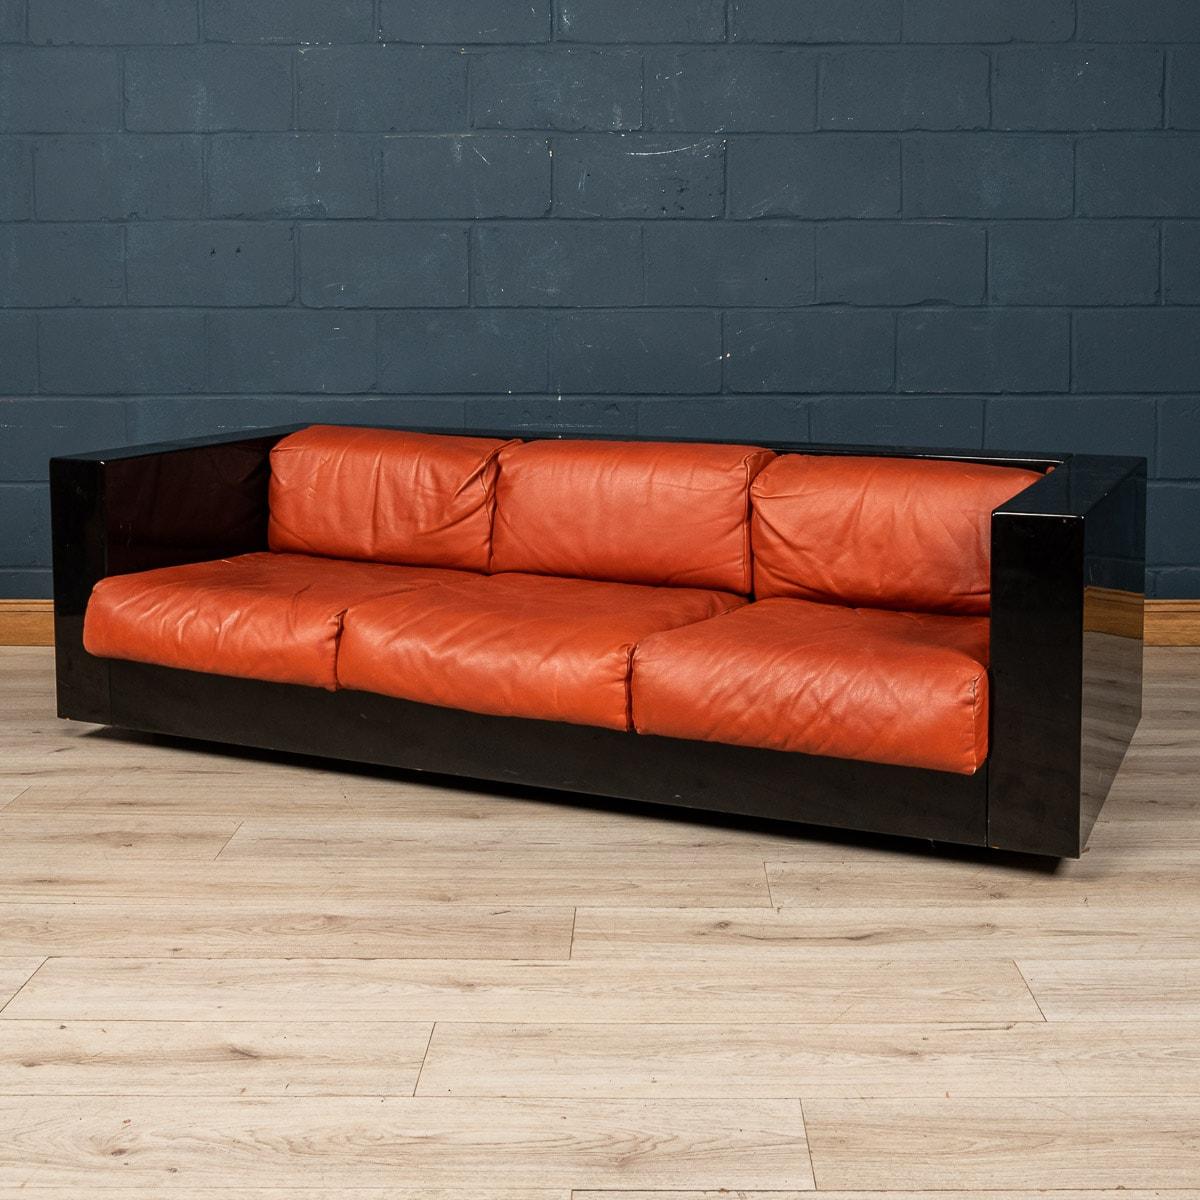 A lovely three seater sofa designed by the Italian designer couple Lella and Massimo Vignelli. Produced by Poltronova of Florence, the sofa is a design classic with a wonderful black and red combination for the frame and cushions respectively.